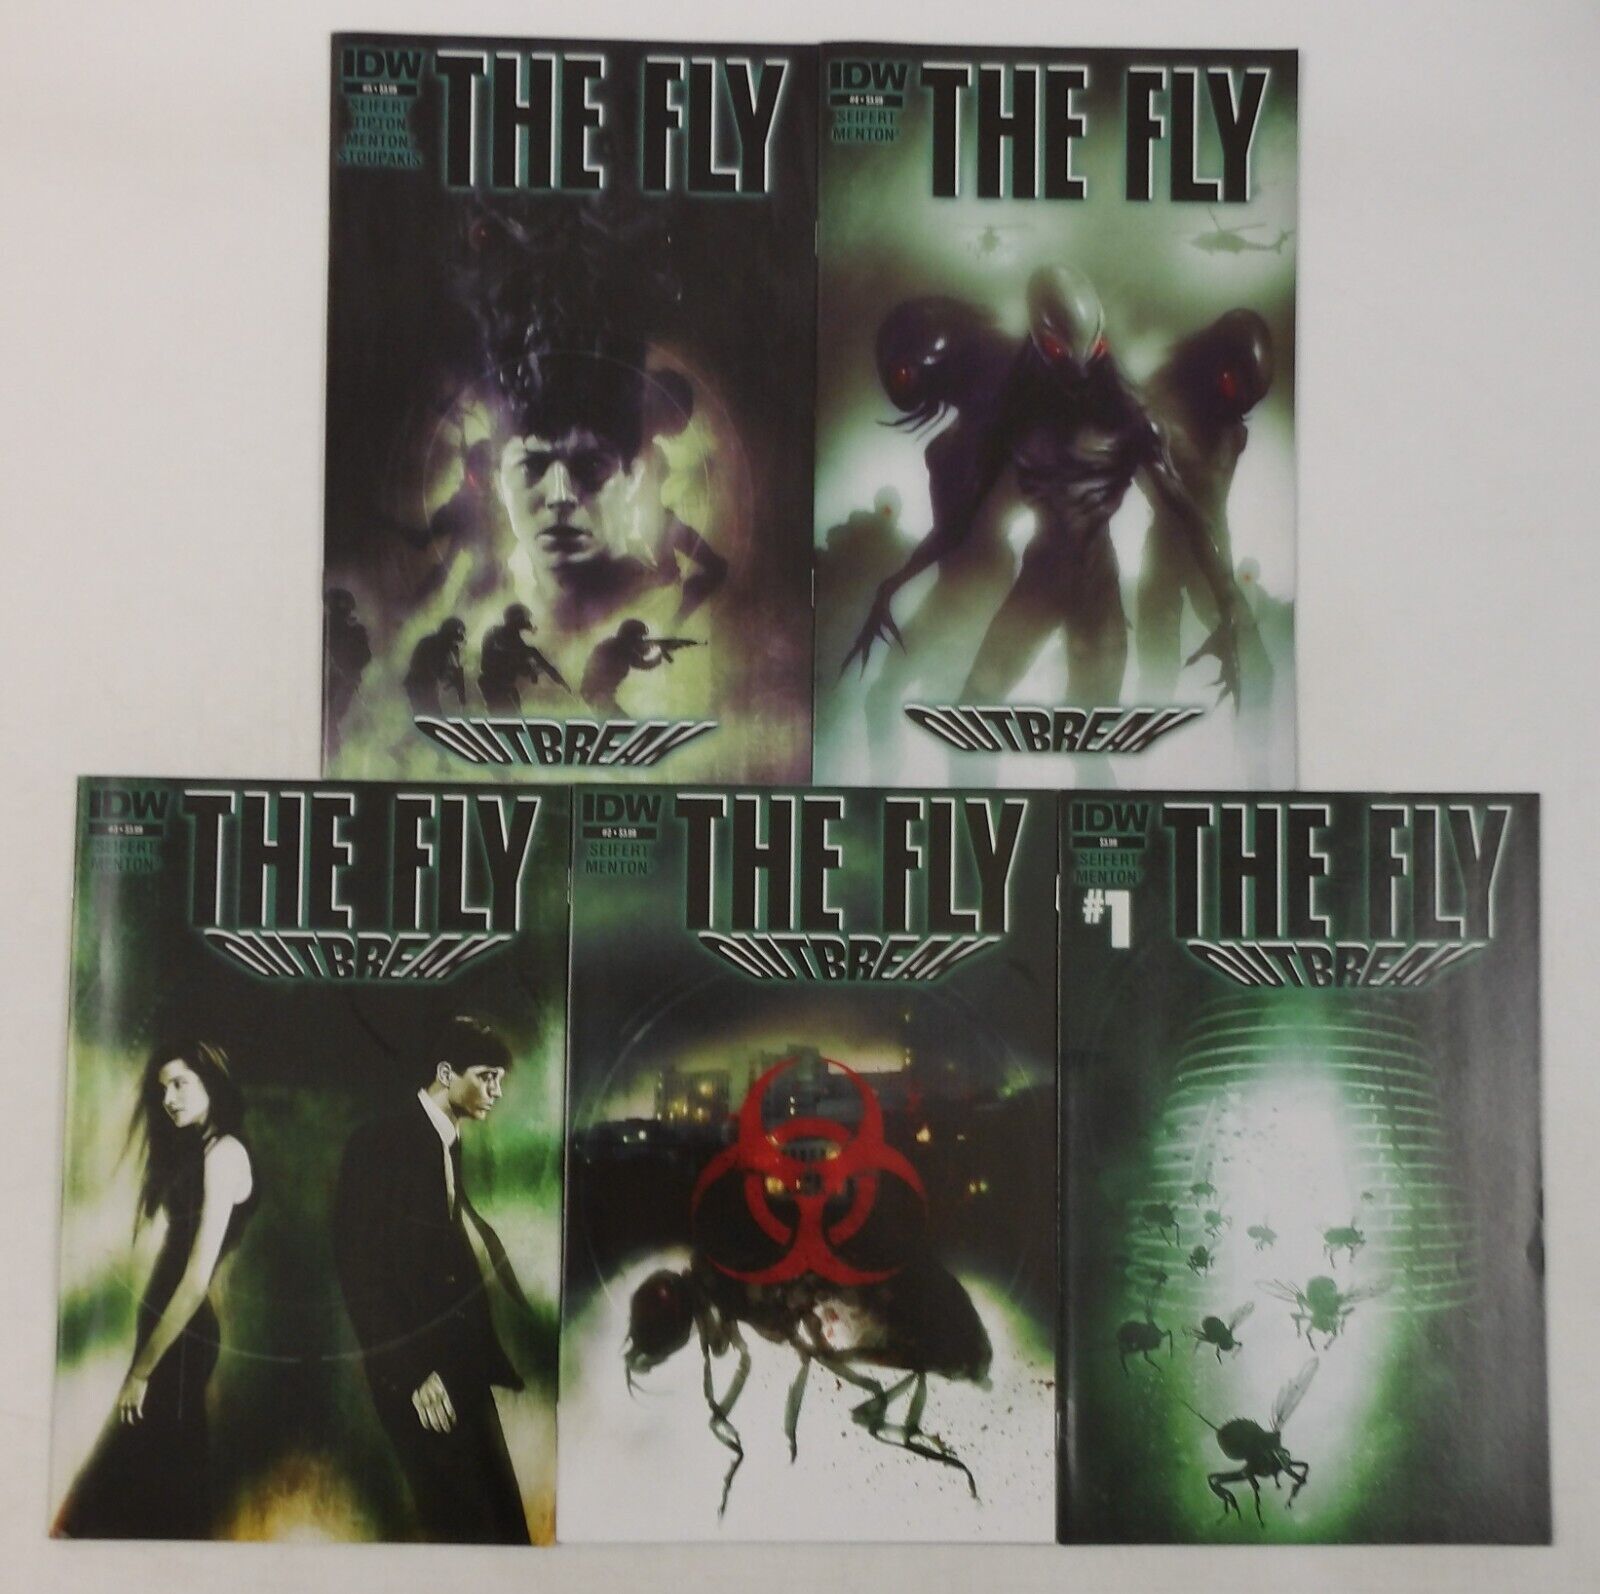 the Fly: Outbreak #1-5 VF/NM complete series - sequel to the classic horror film